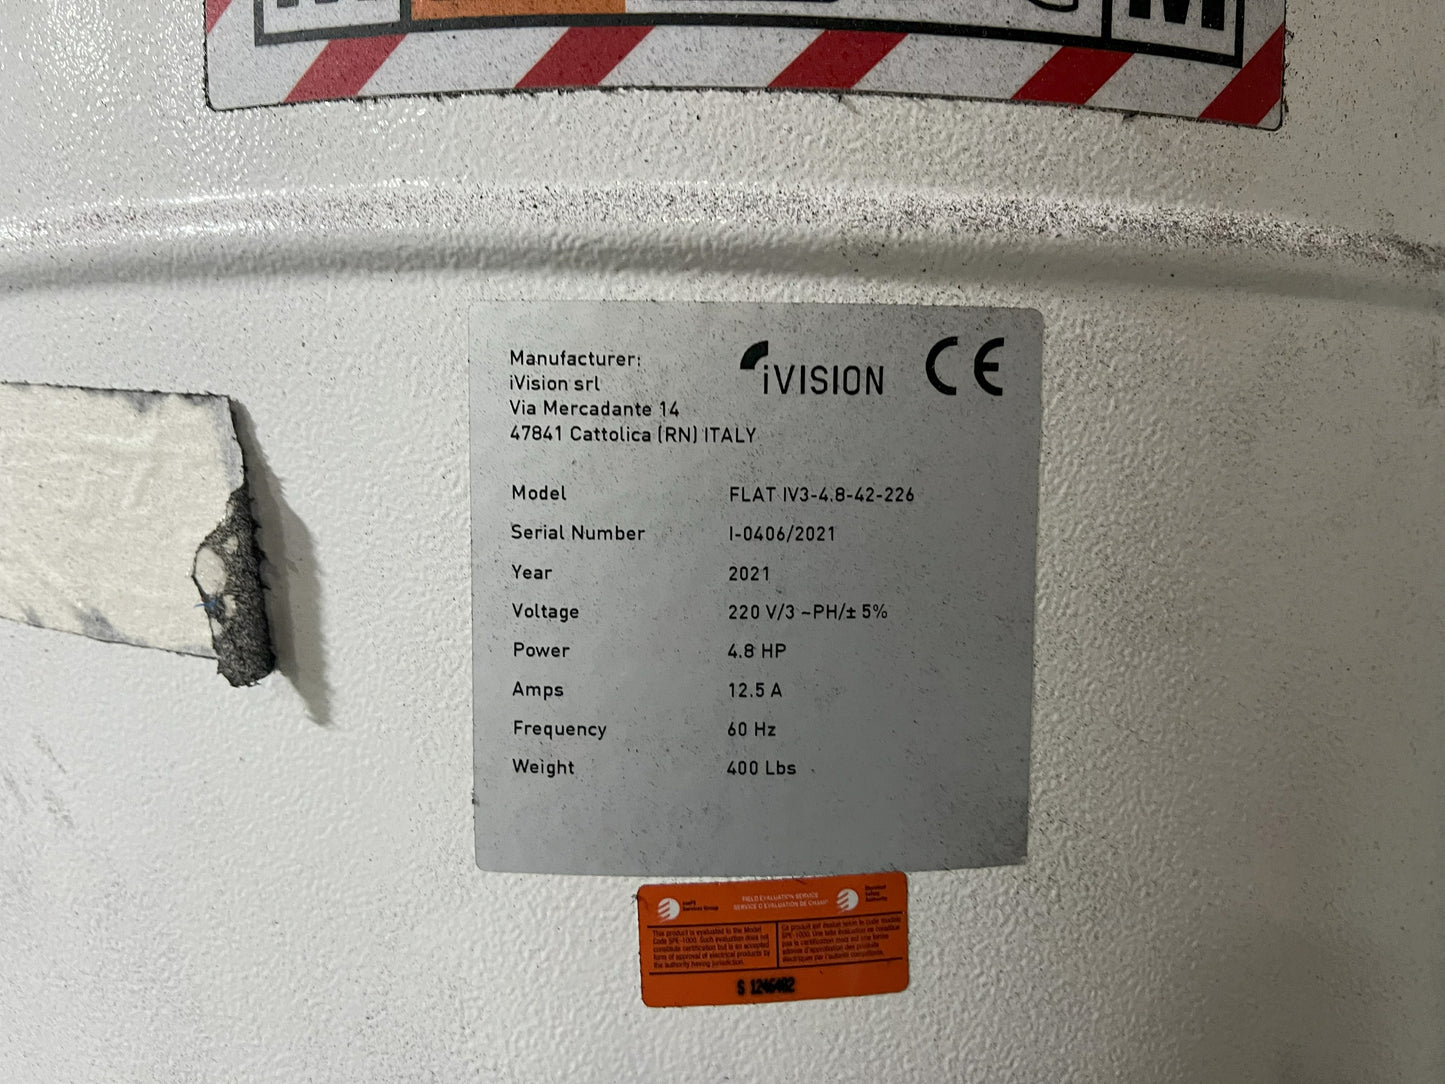 IVISION DUST COLLECTOR MODEL FLAT IV3-4.8-42-226 (S/N I-0406/2021)